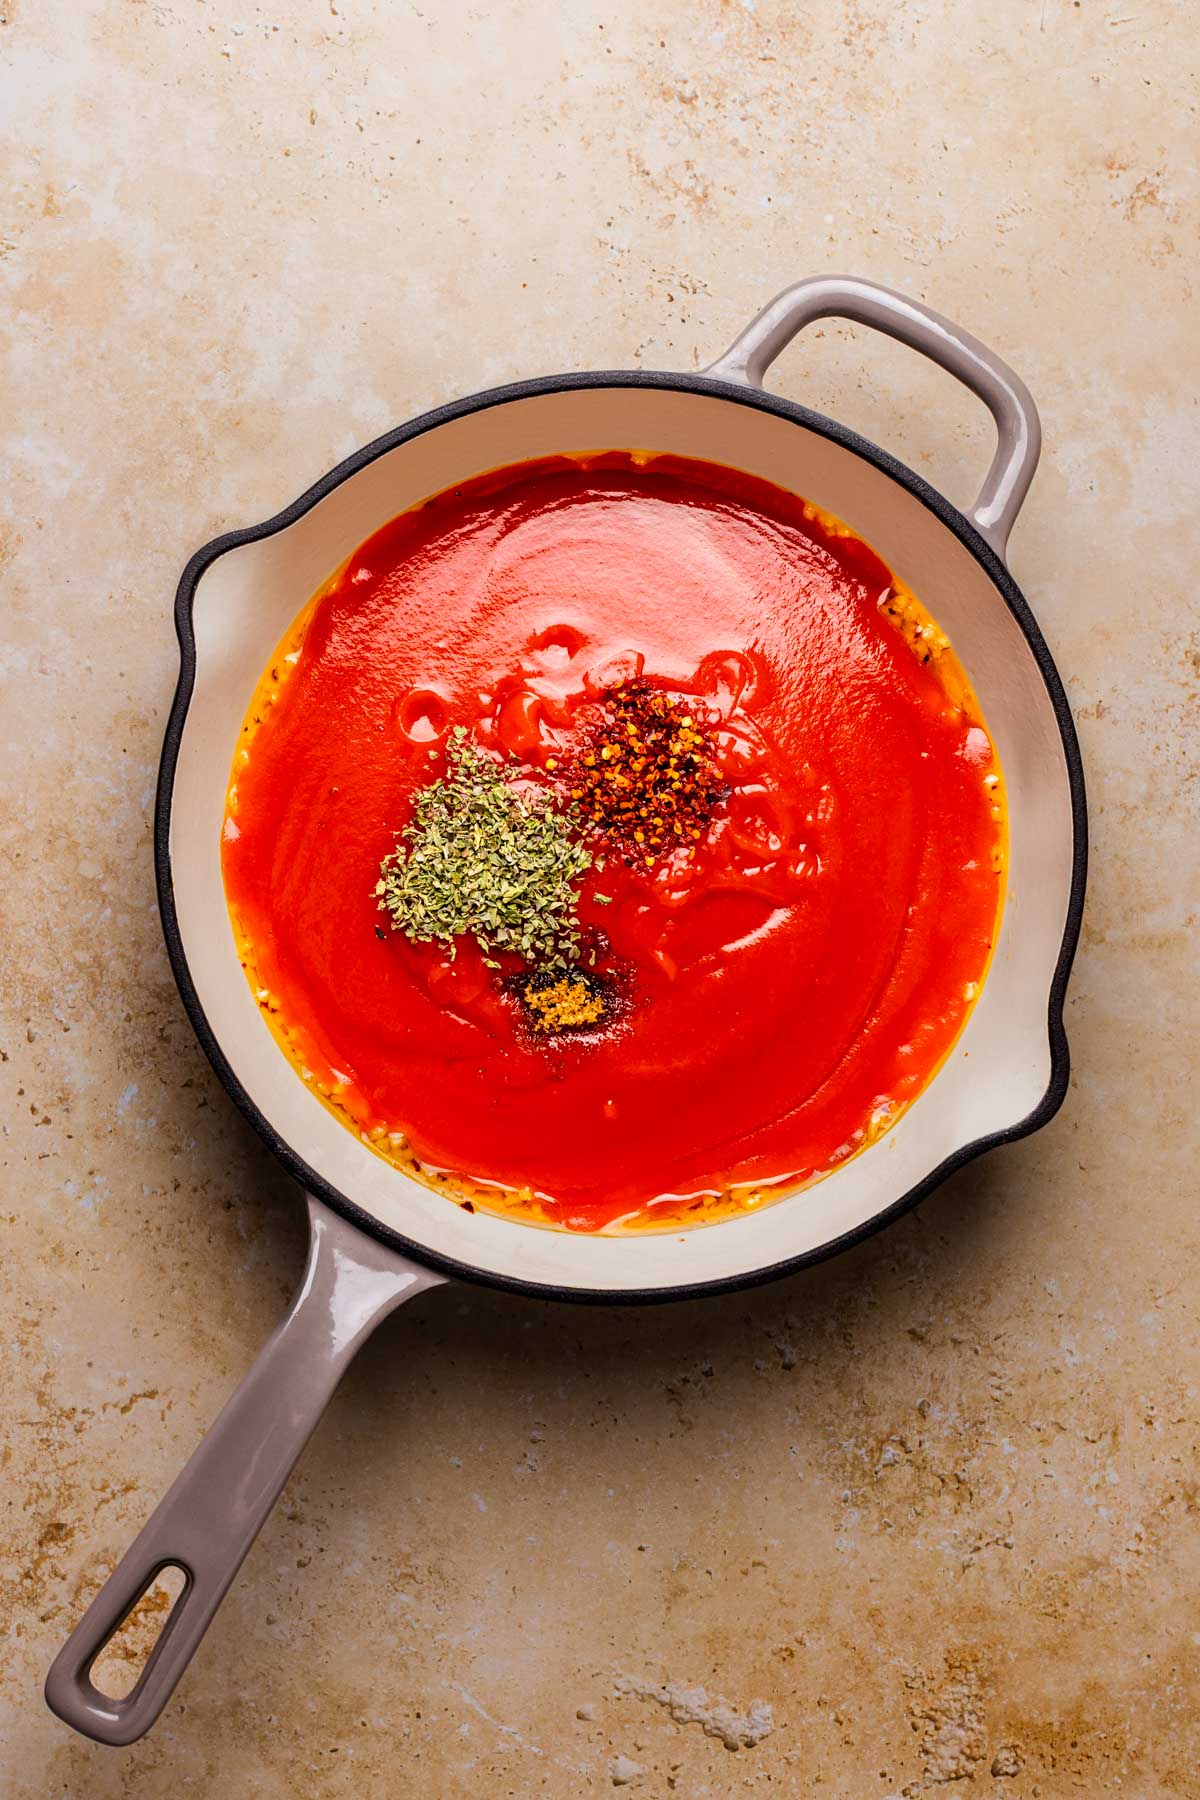 An overhead shot of a skillet with tomato sauce, sauteed garlic, red pepper flakes, and seasonings.